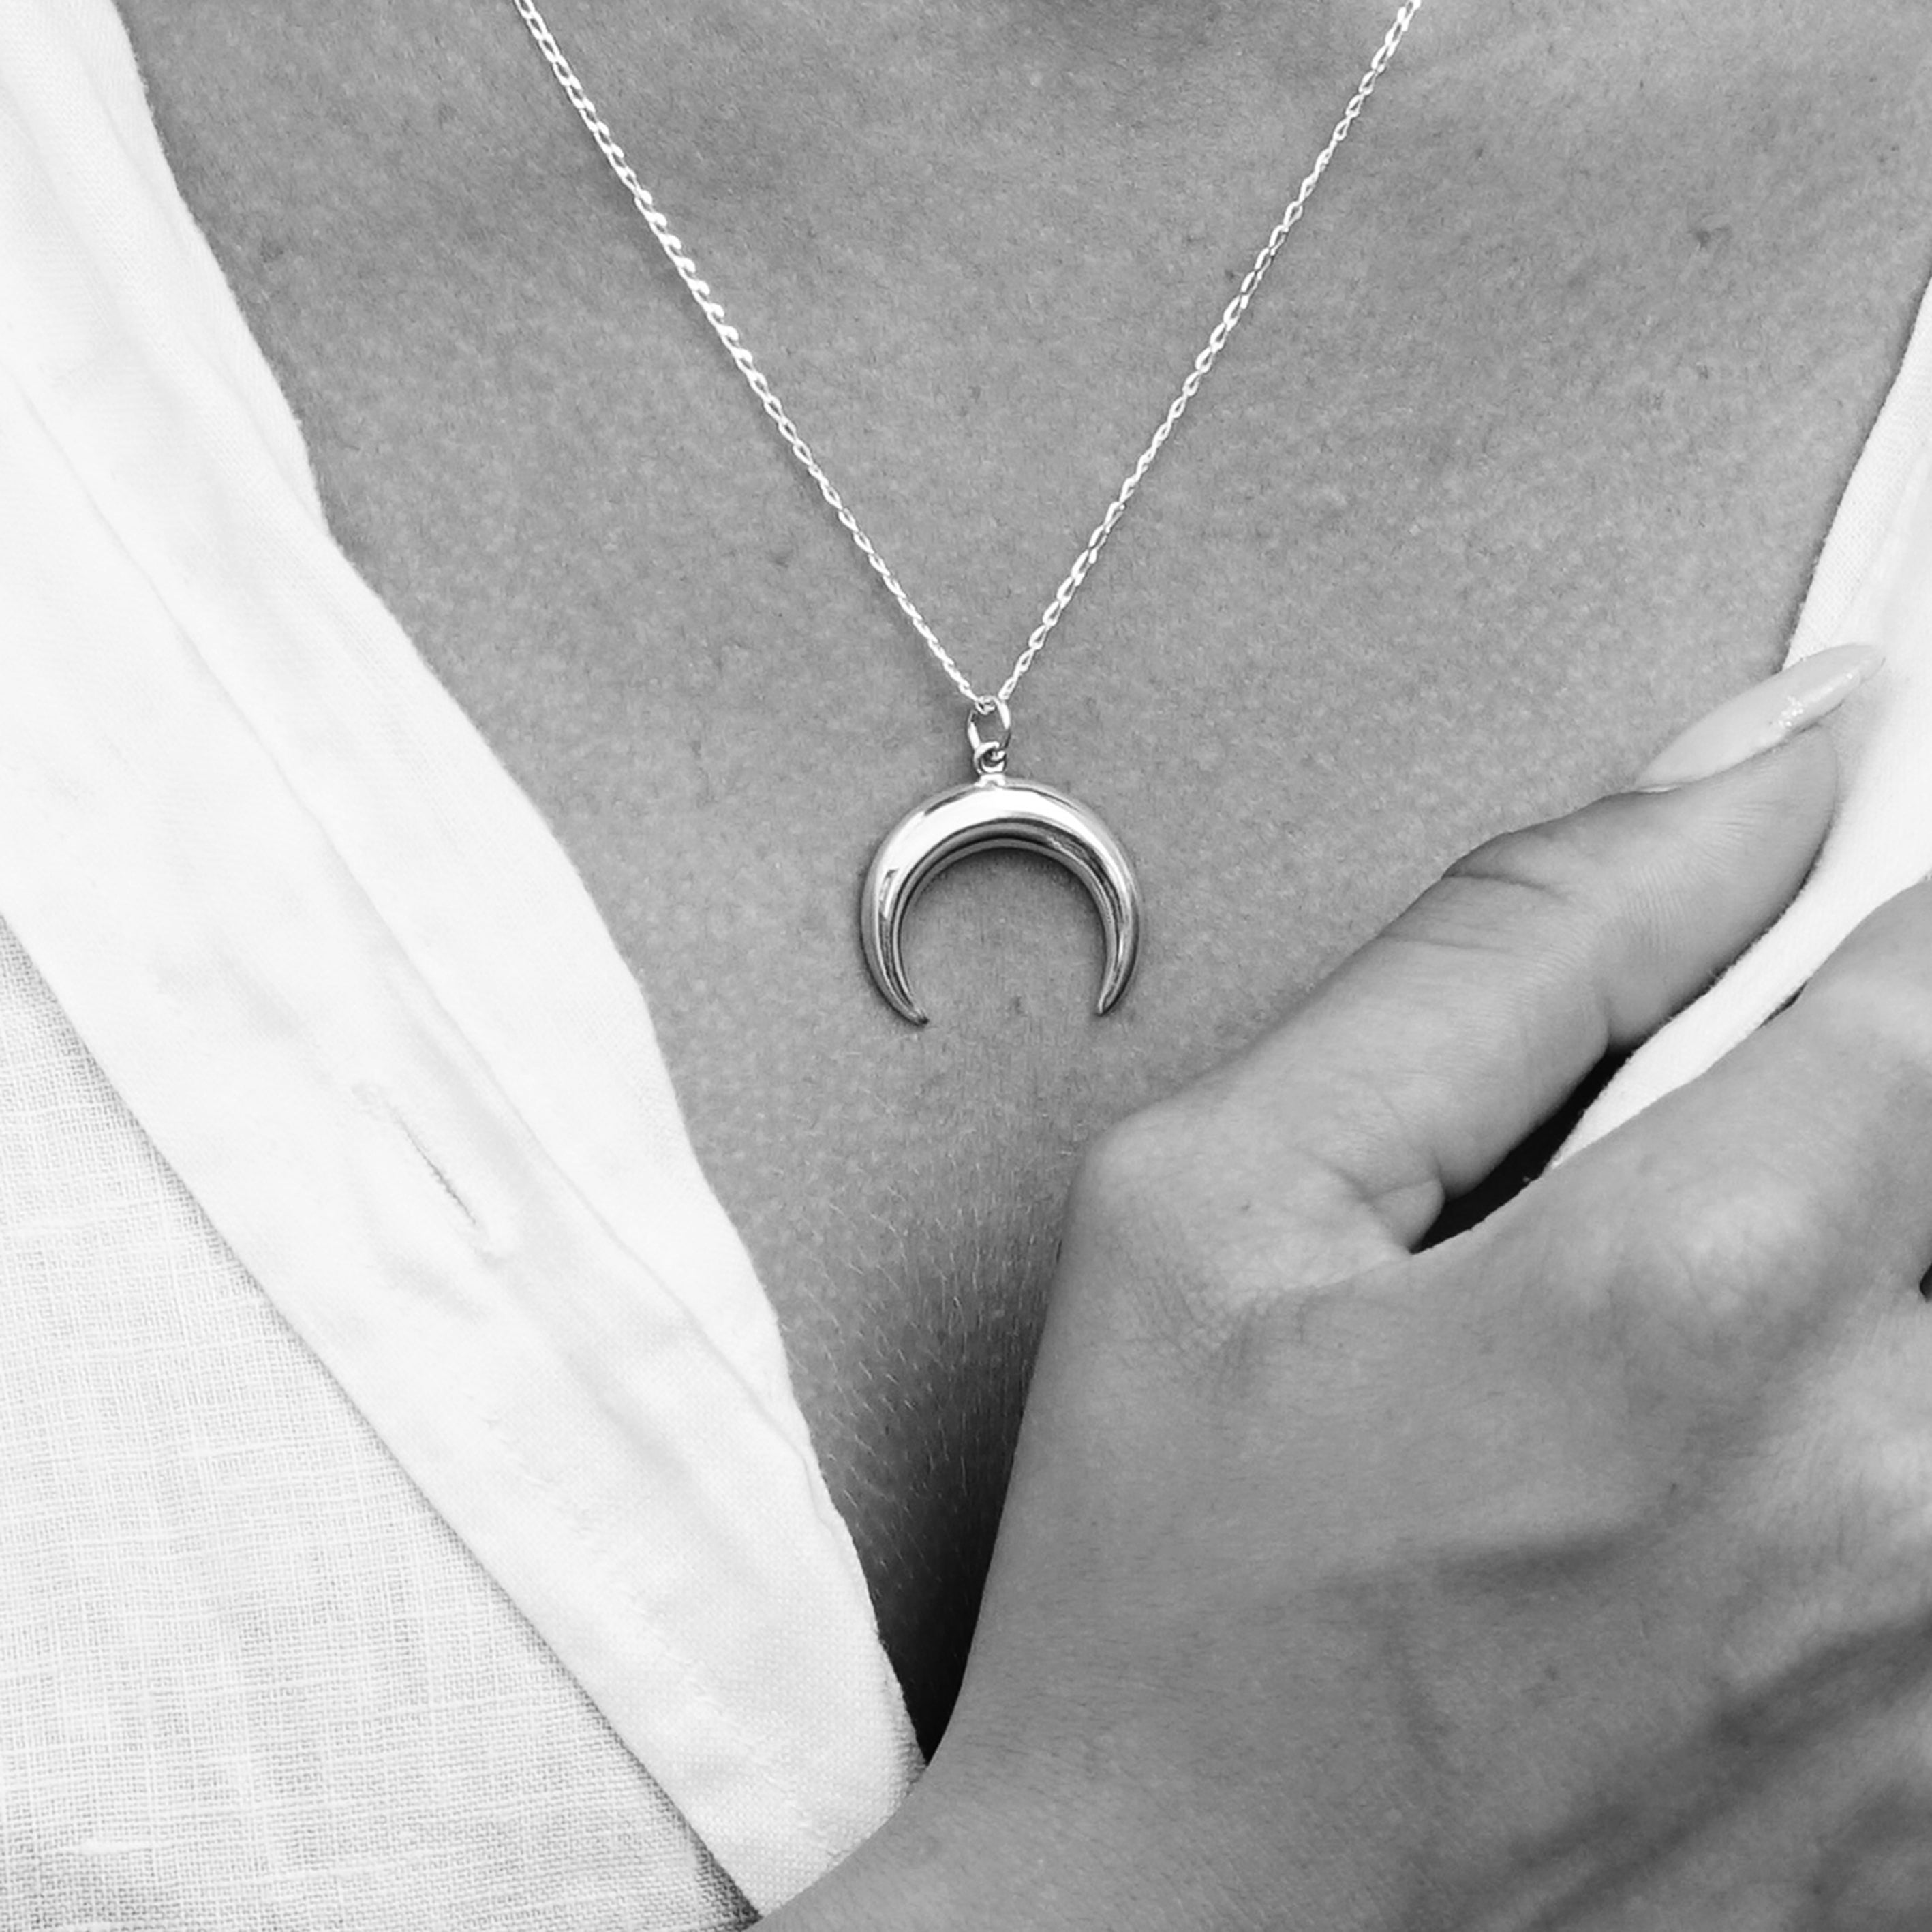 model wearing Silver crescent moon charm on a chain necklace